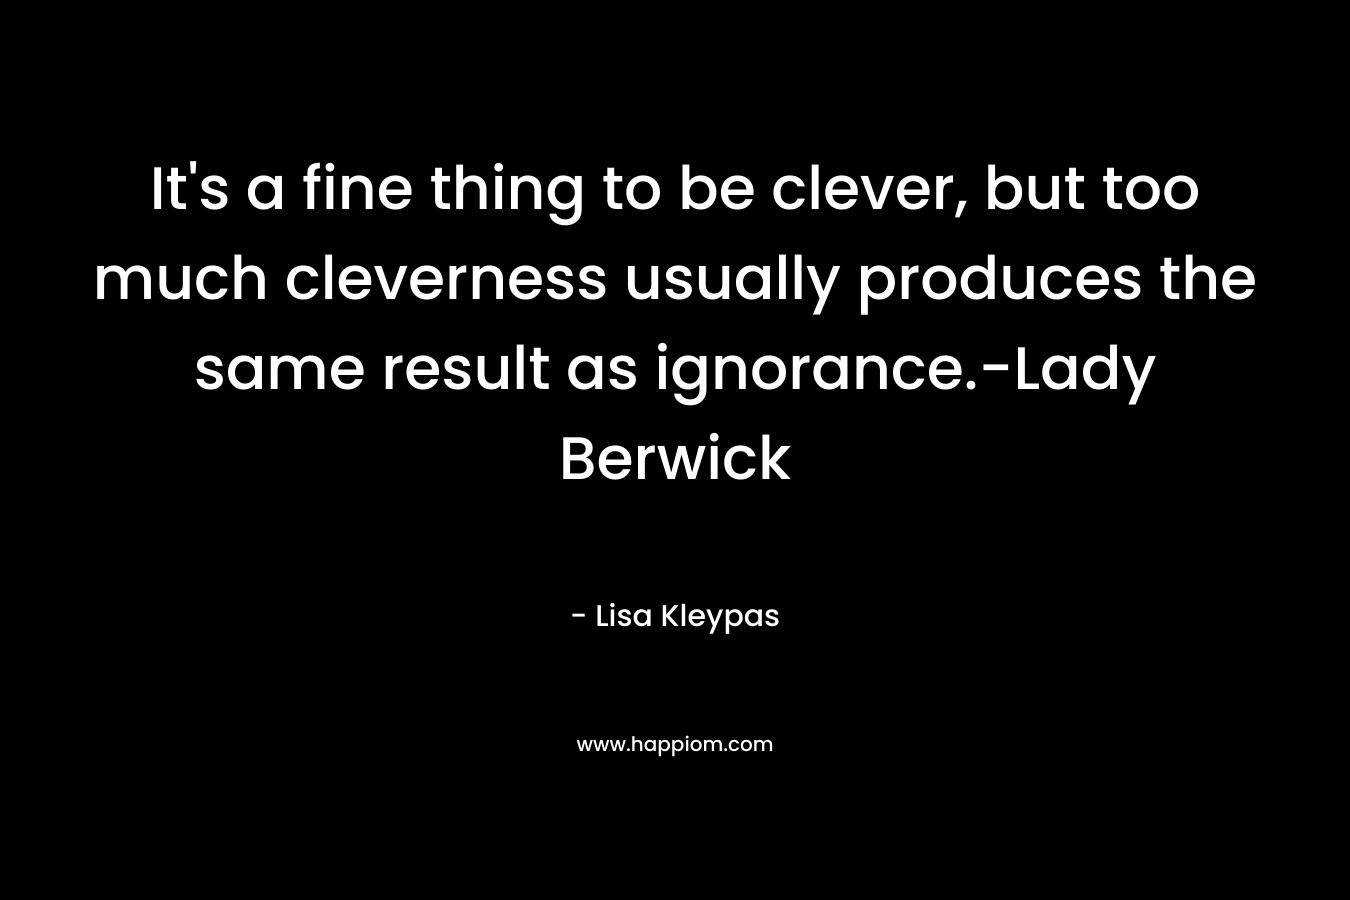 It's a fine thing to be clever, but too much cleverness usually produces the same result as ignorance.-Lady Berwick